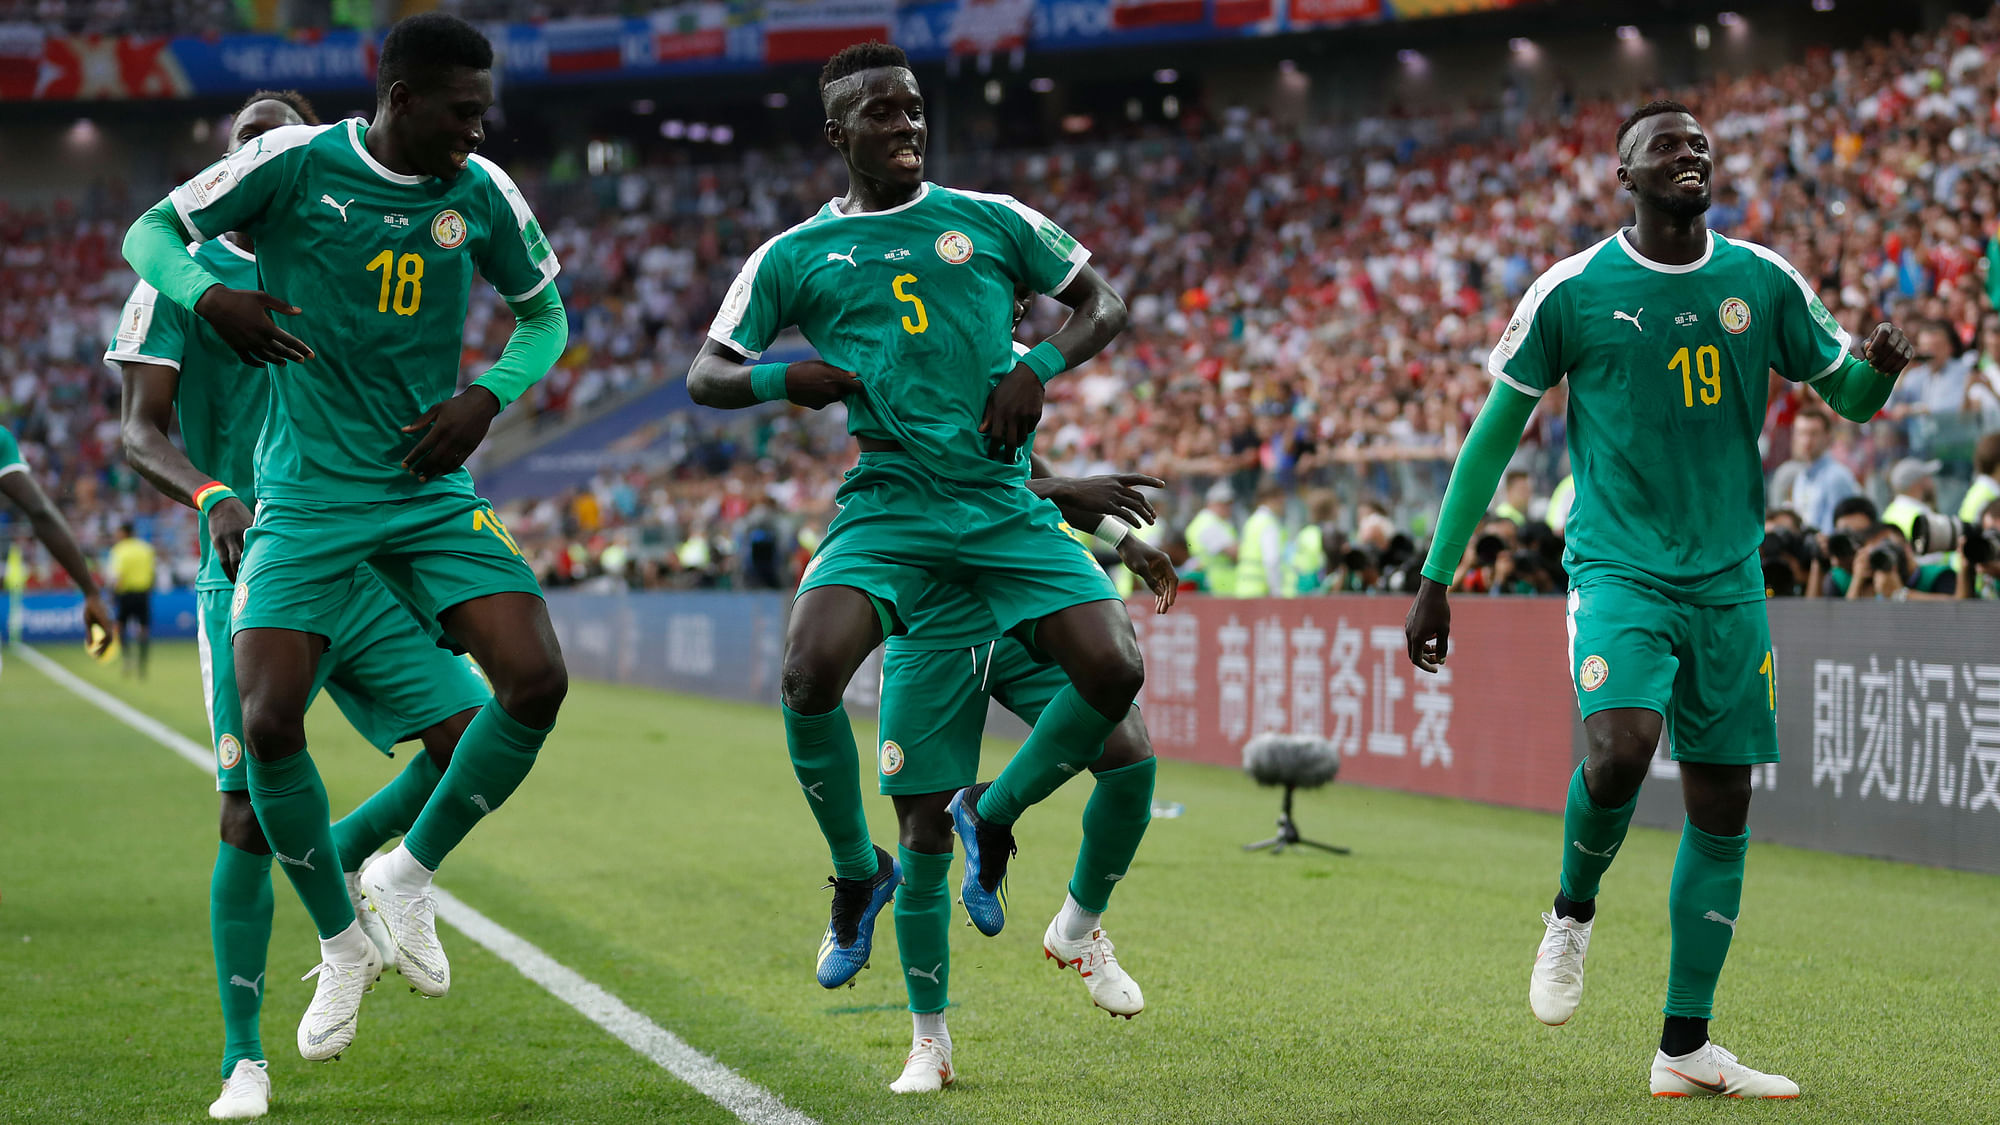 Can Senegal recreate the magic of 2002 in their second World Cup?